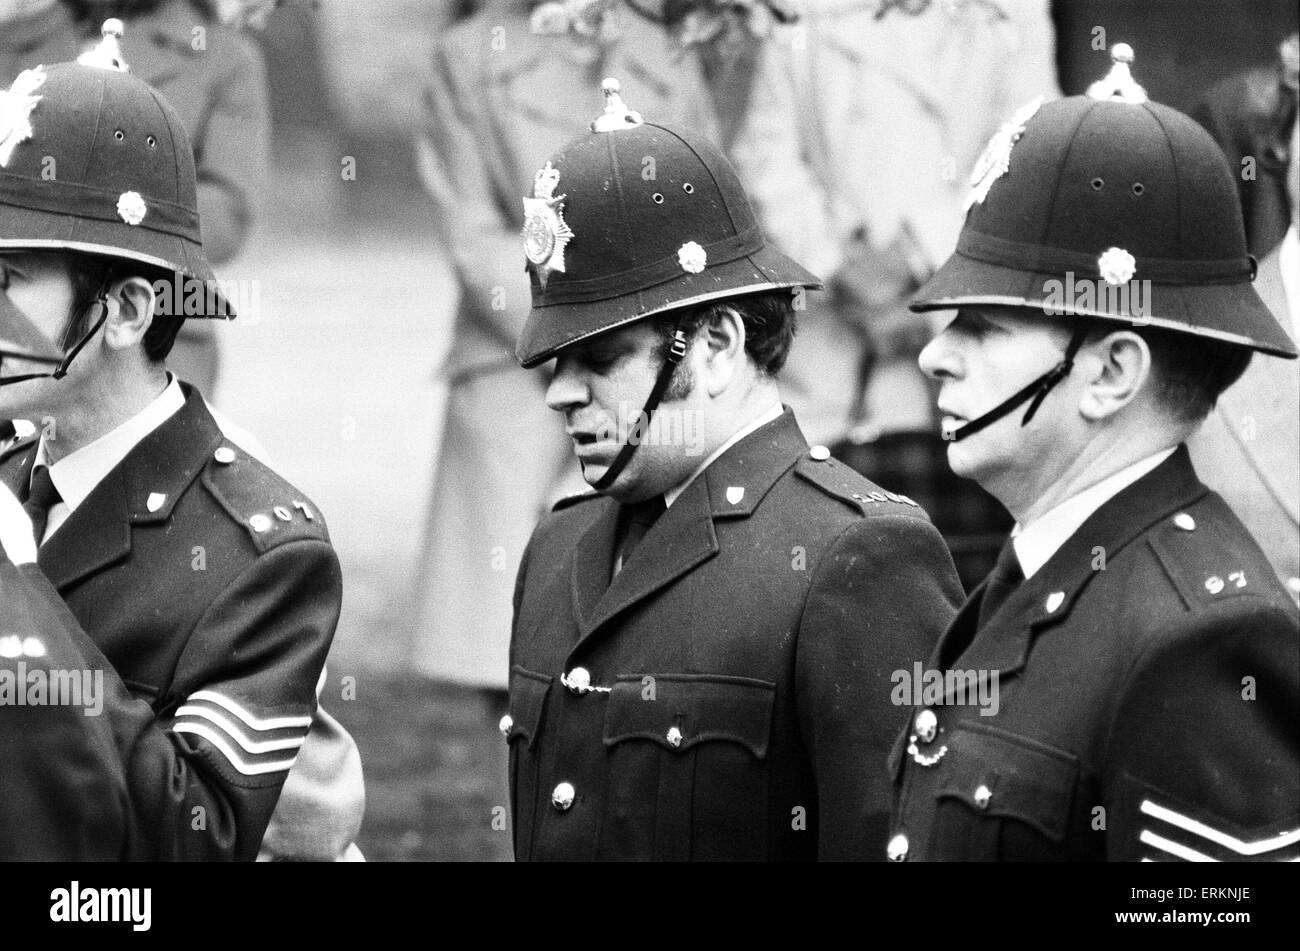 Funeral of Sergeant Brian Dawson, Leicester, 9th September 1975. Sgt Dawson was one of three people killed in the siege of Lambourne Road in Leicester. Friend and colleague PC Don Acton, pictured crying as he can no longer hold in his emotion. Stock Photo